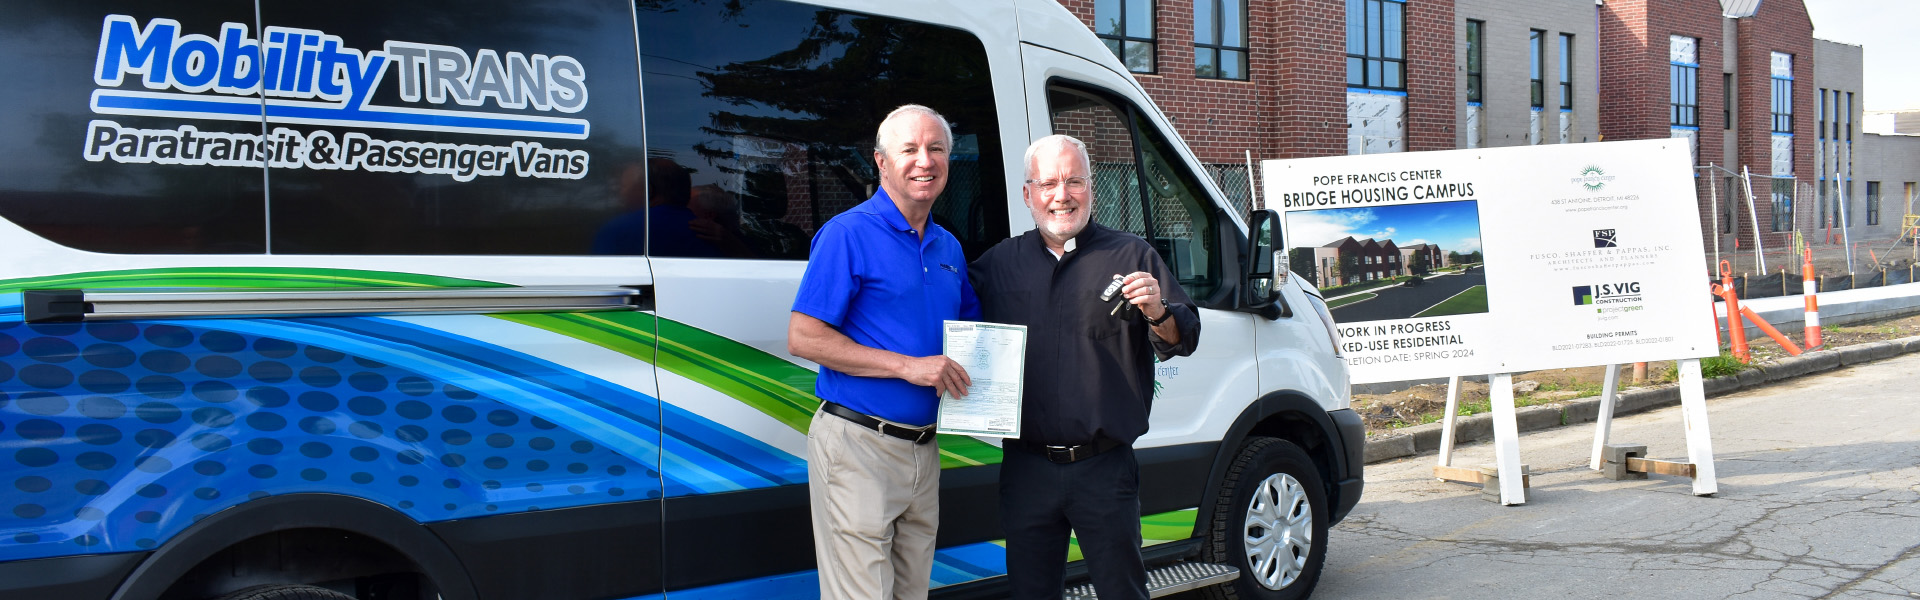 Dave Brown, General Manager of MobilityTRANS, presenting the title and keys of a new Ford E-Transit to Fr. Tim McCabe, Executive Director of the Pope Francis Center, in a handover event on Tuesday.